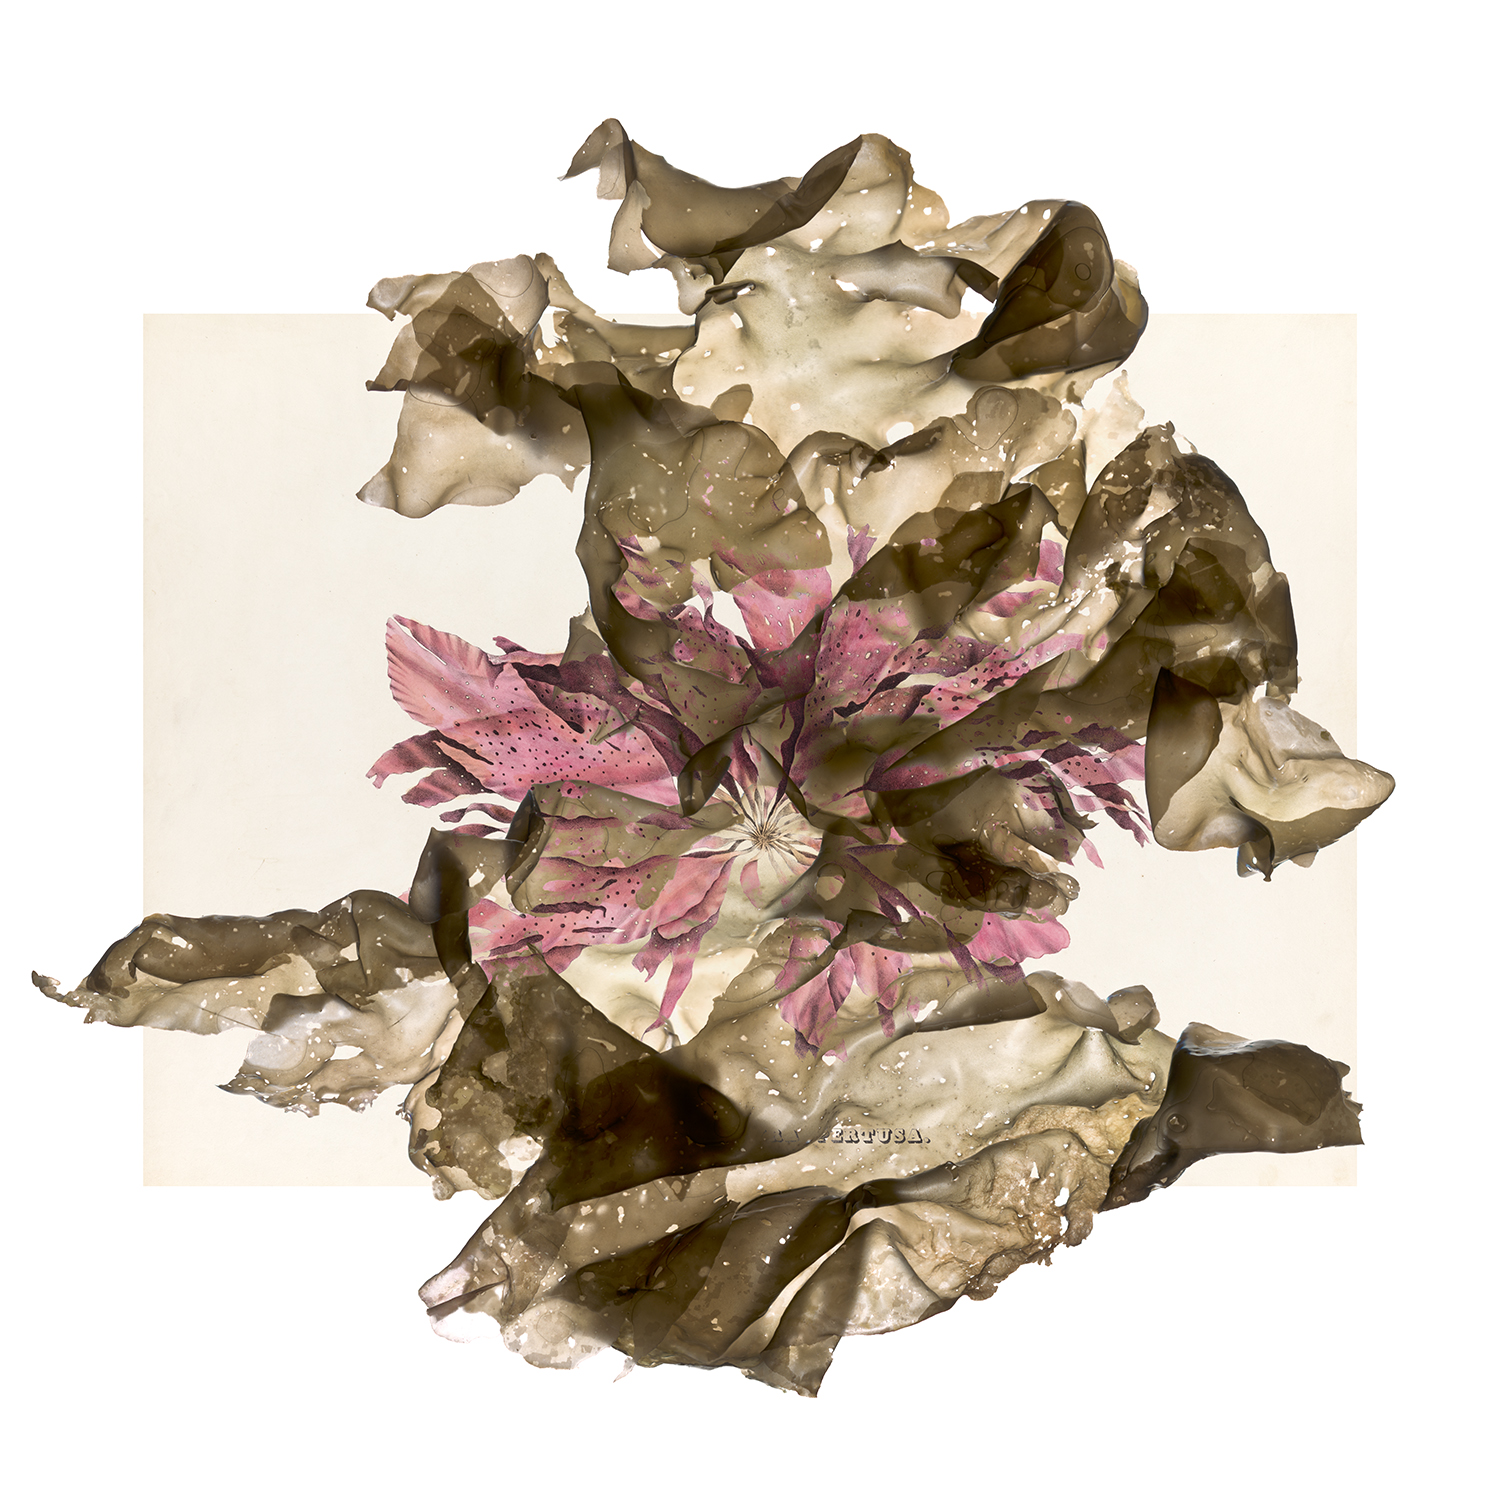 Contemporary scans of seaweed